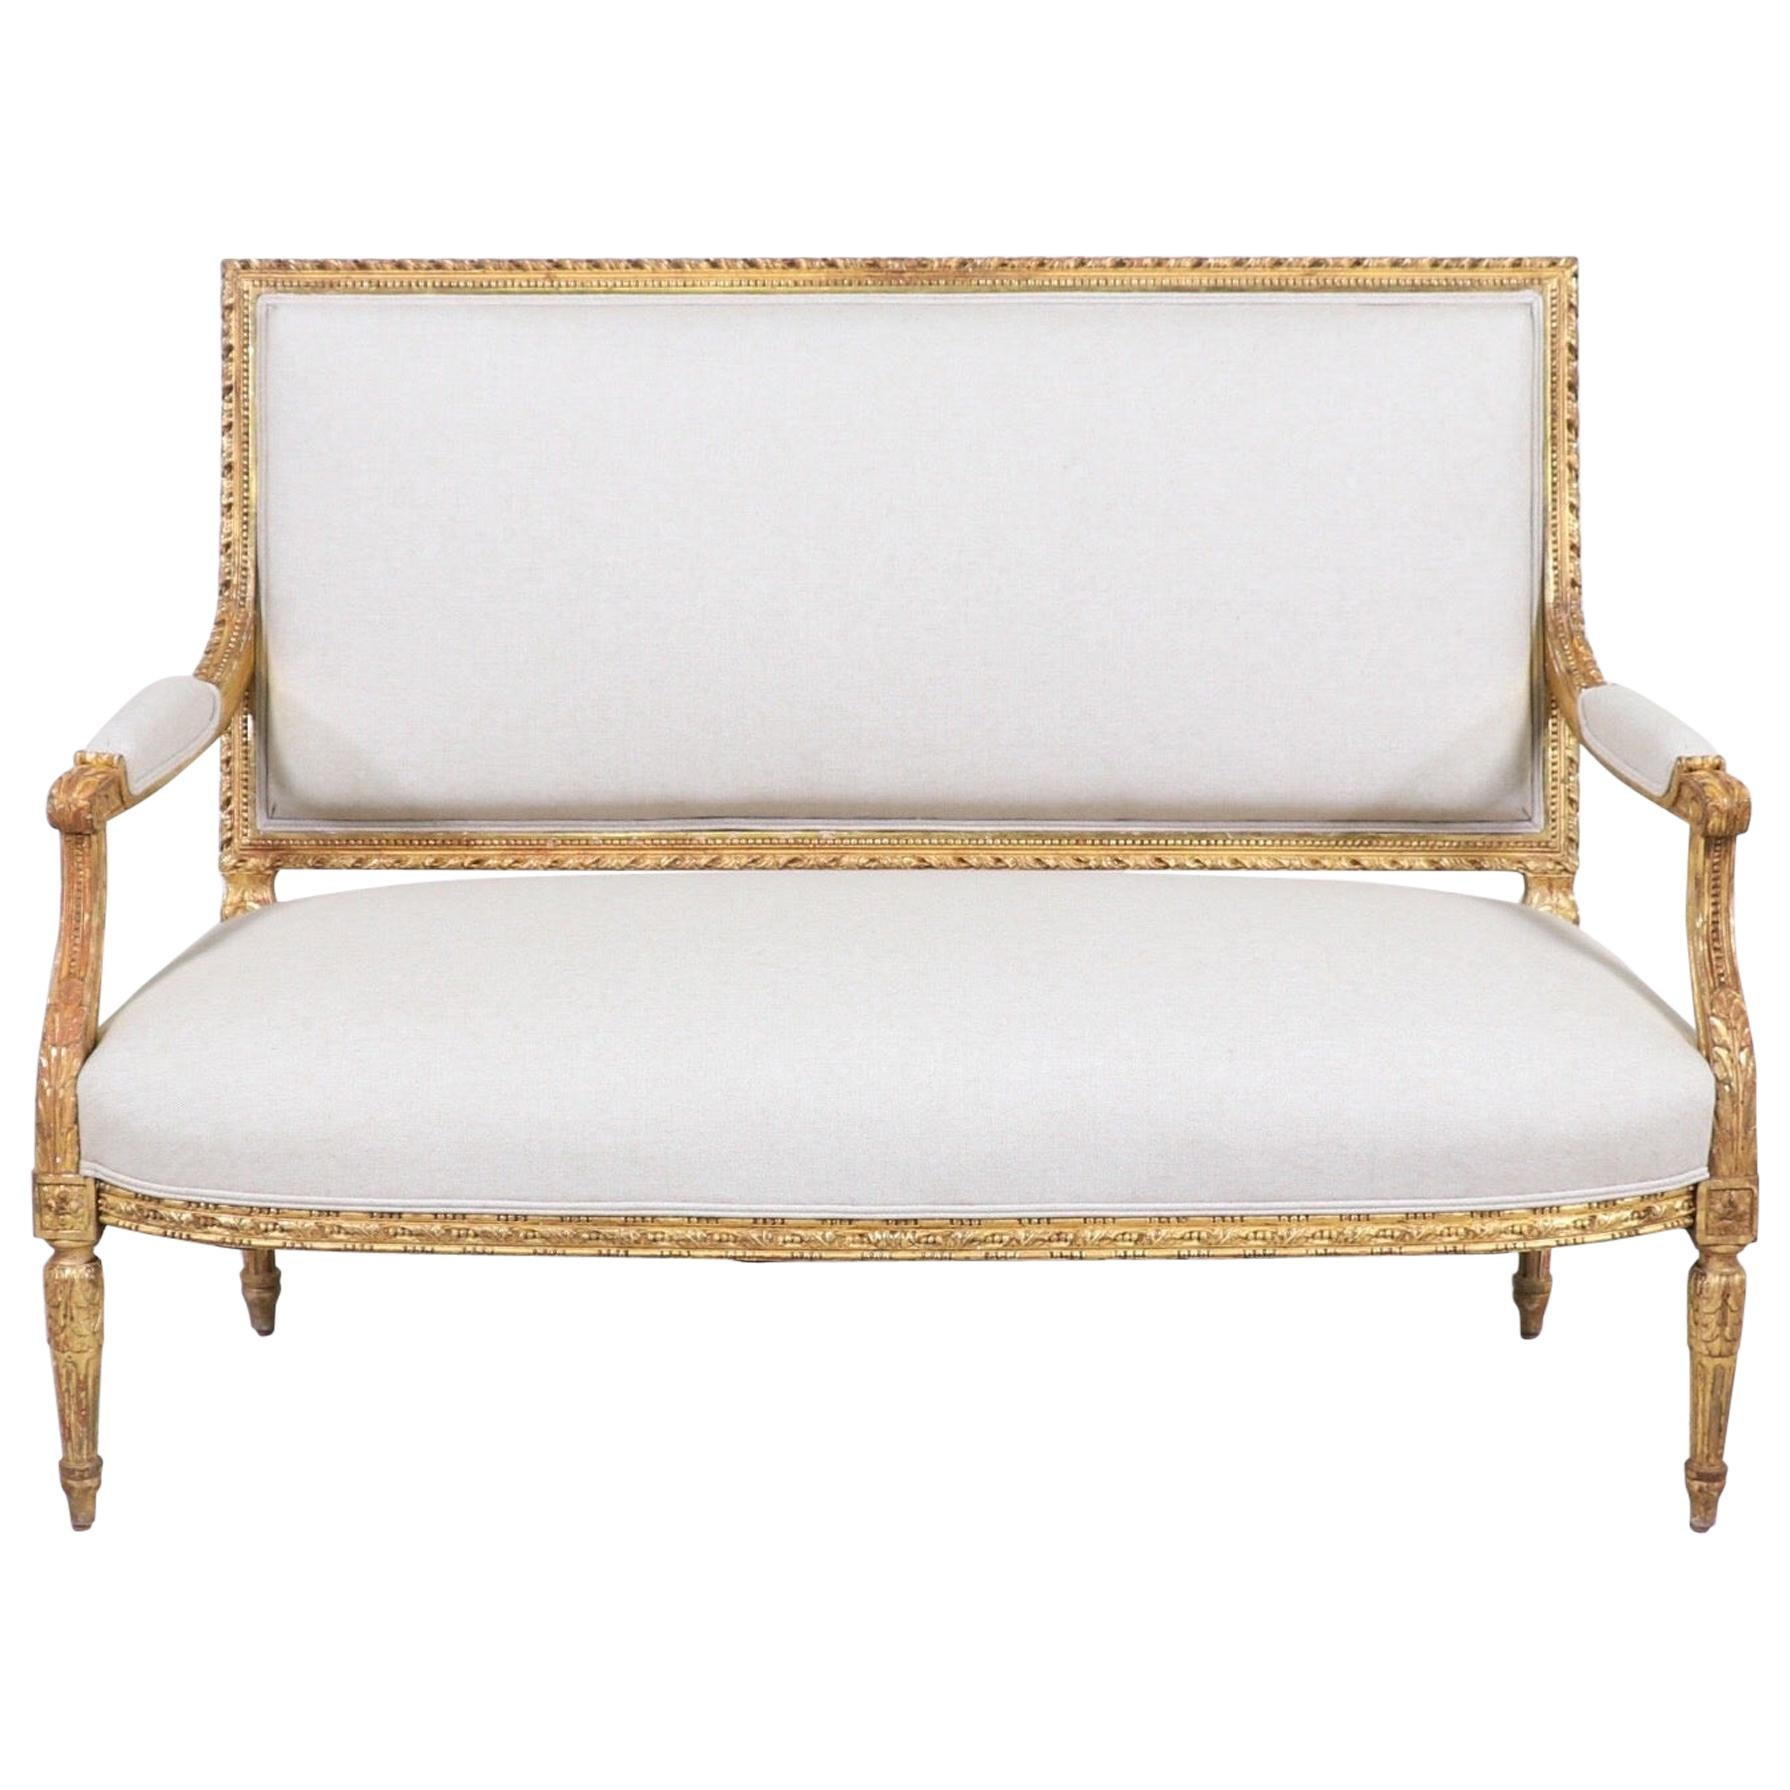 Antique French Louis XVI Style Giltwood Settee